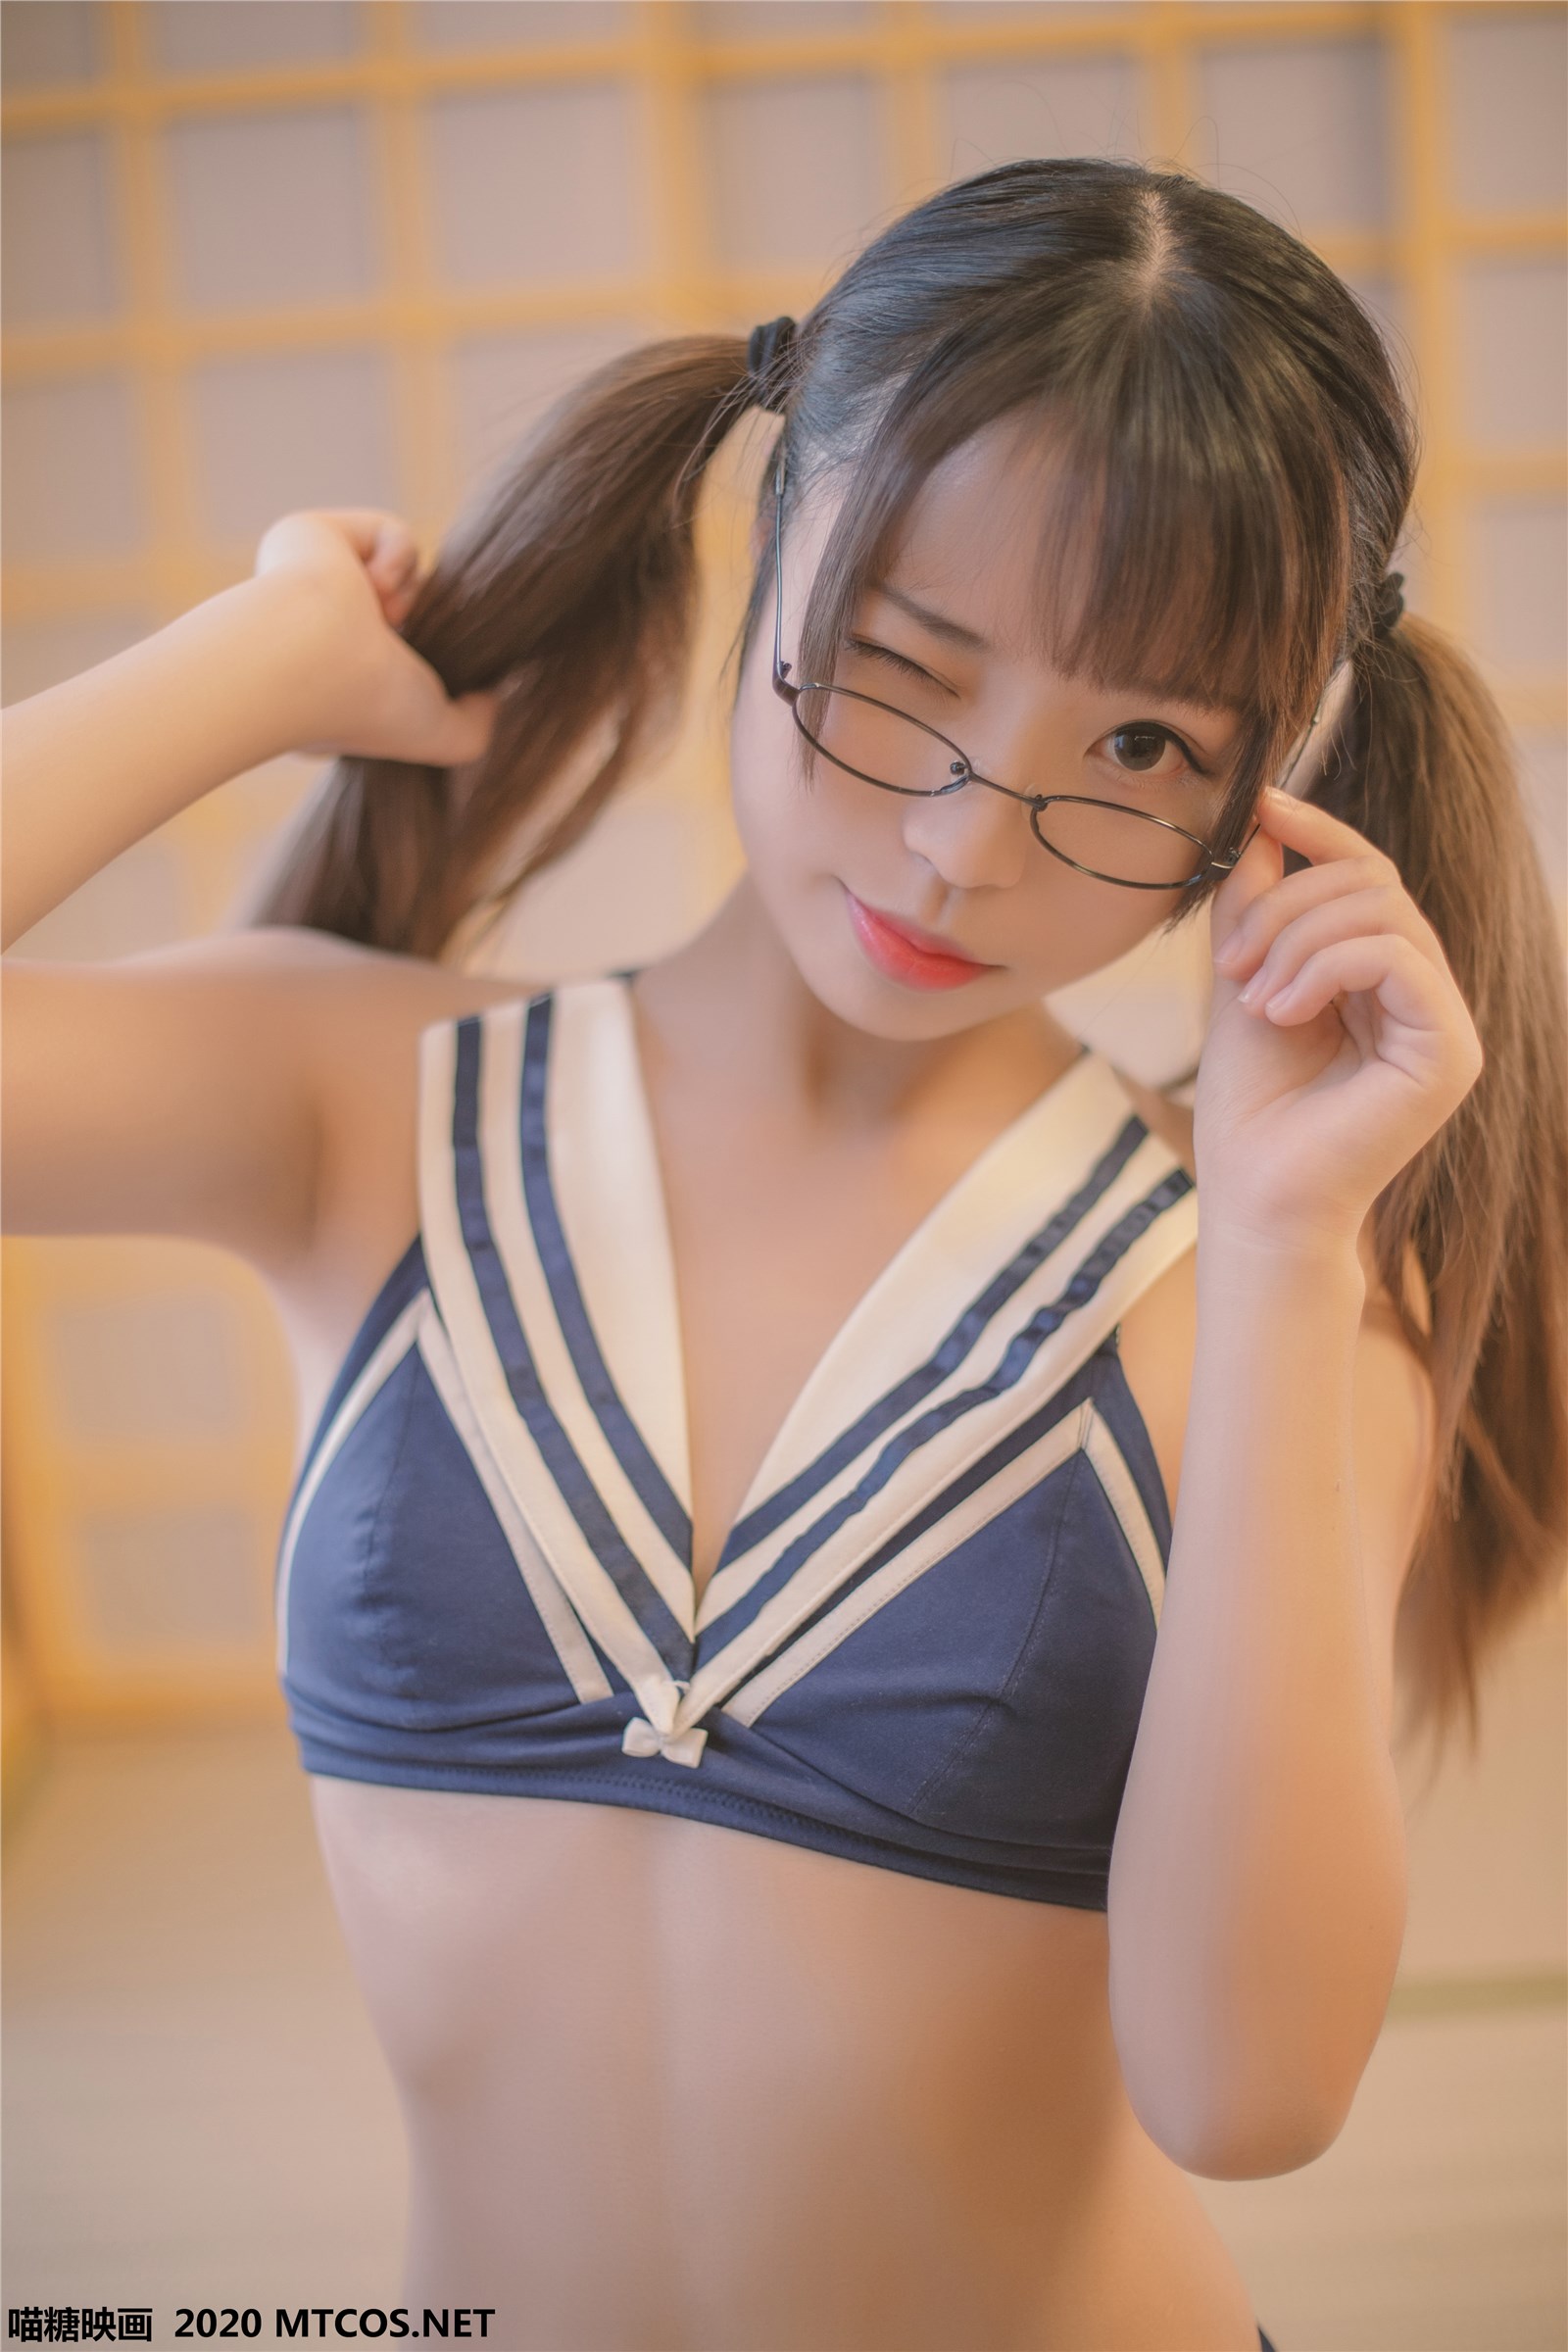 Meow sugar image vol.153 blue and white swimsuit(13)